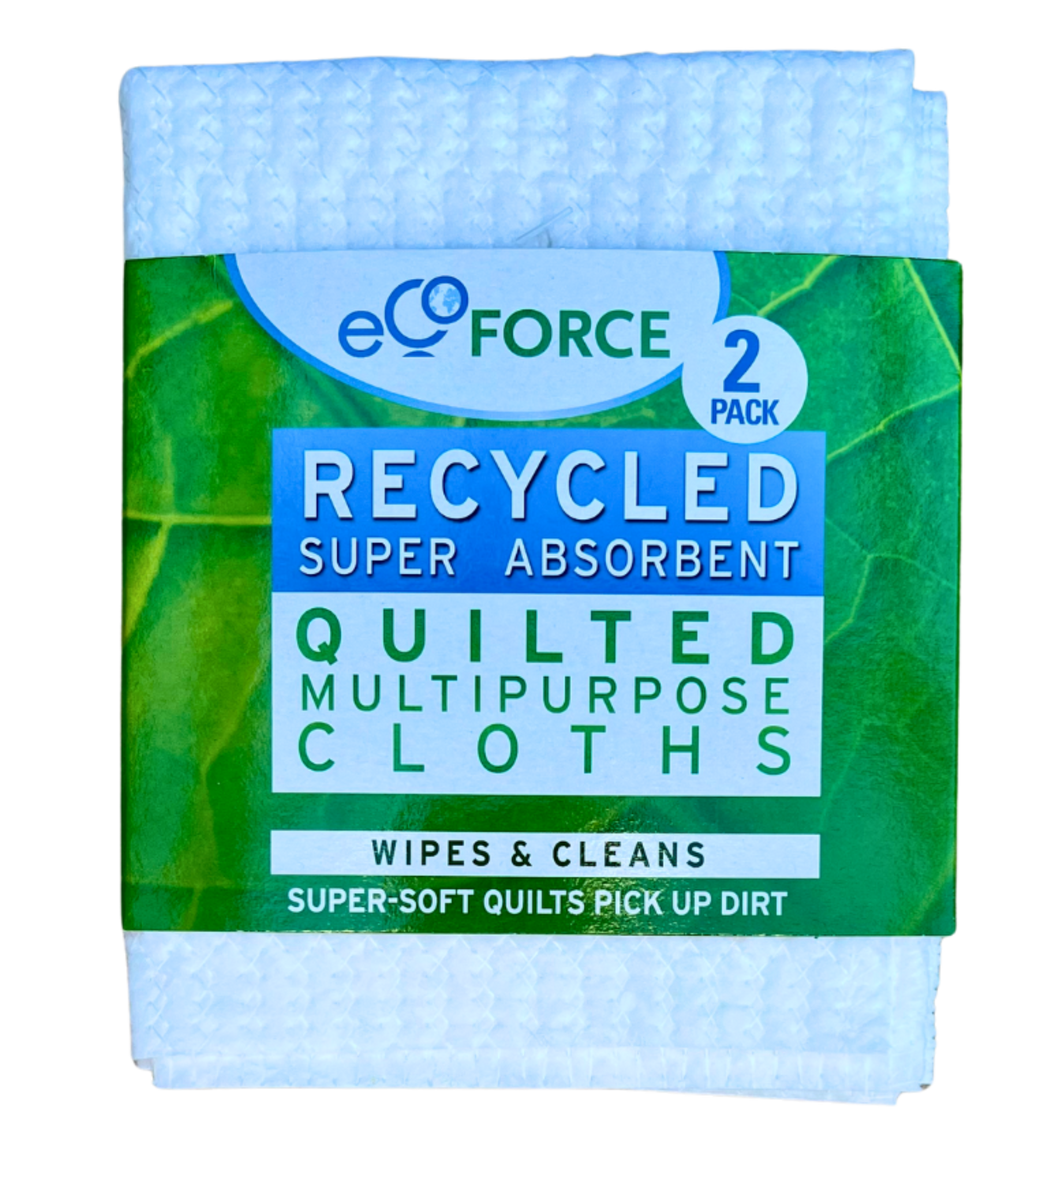 EcoForce Recycled Super Absorbent Quilted Multipurpose Cloths 2 Pack